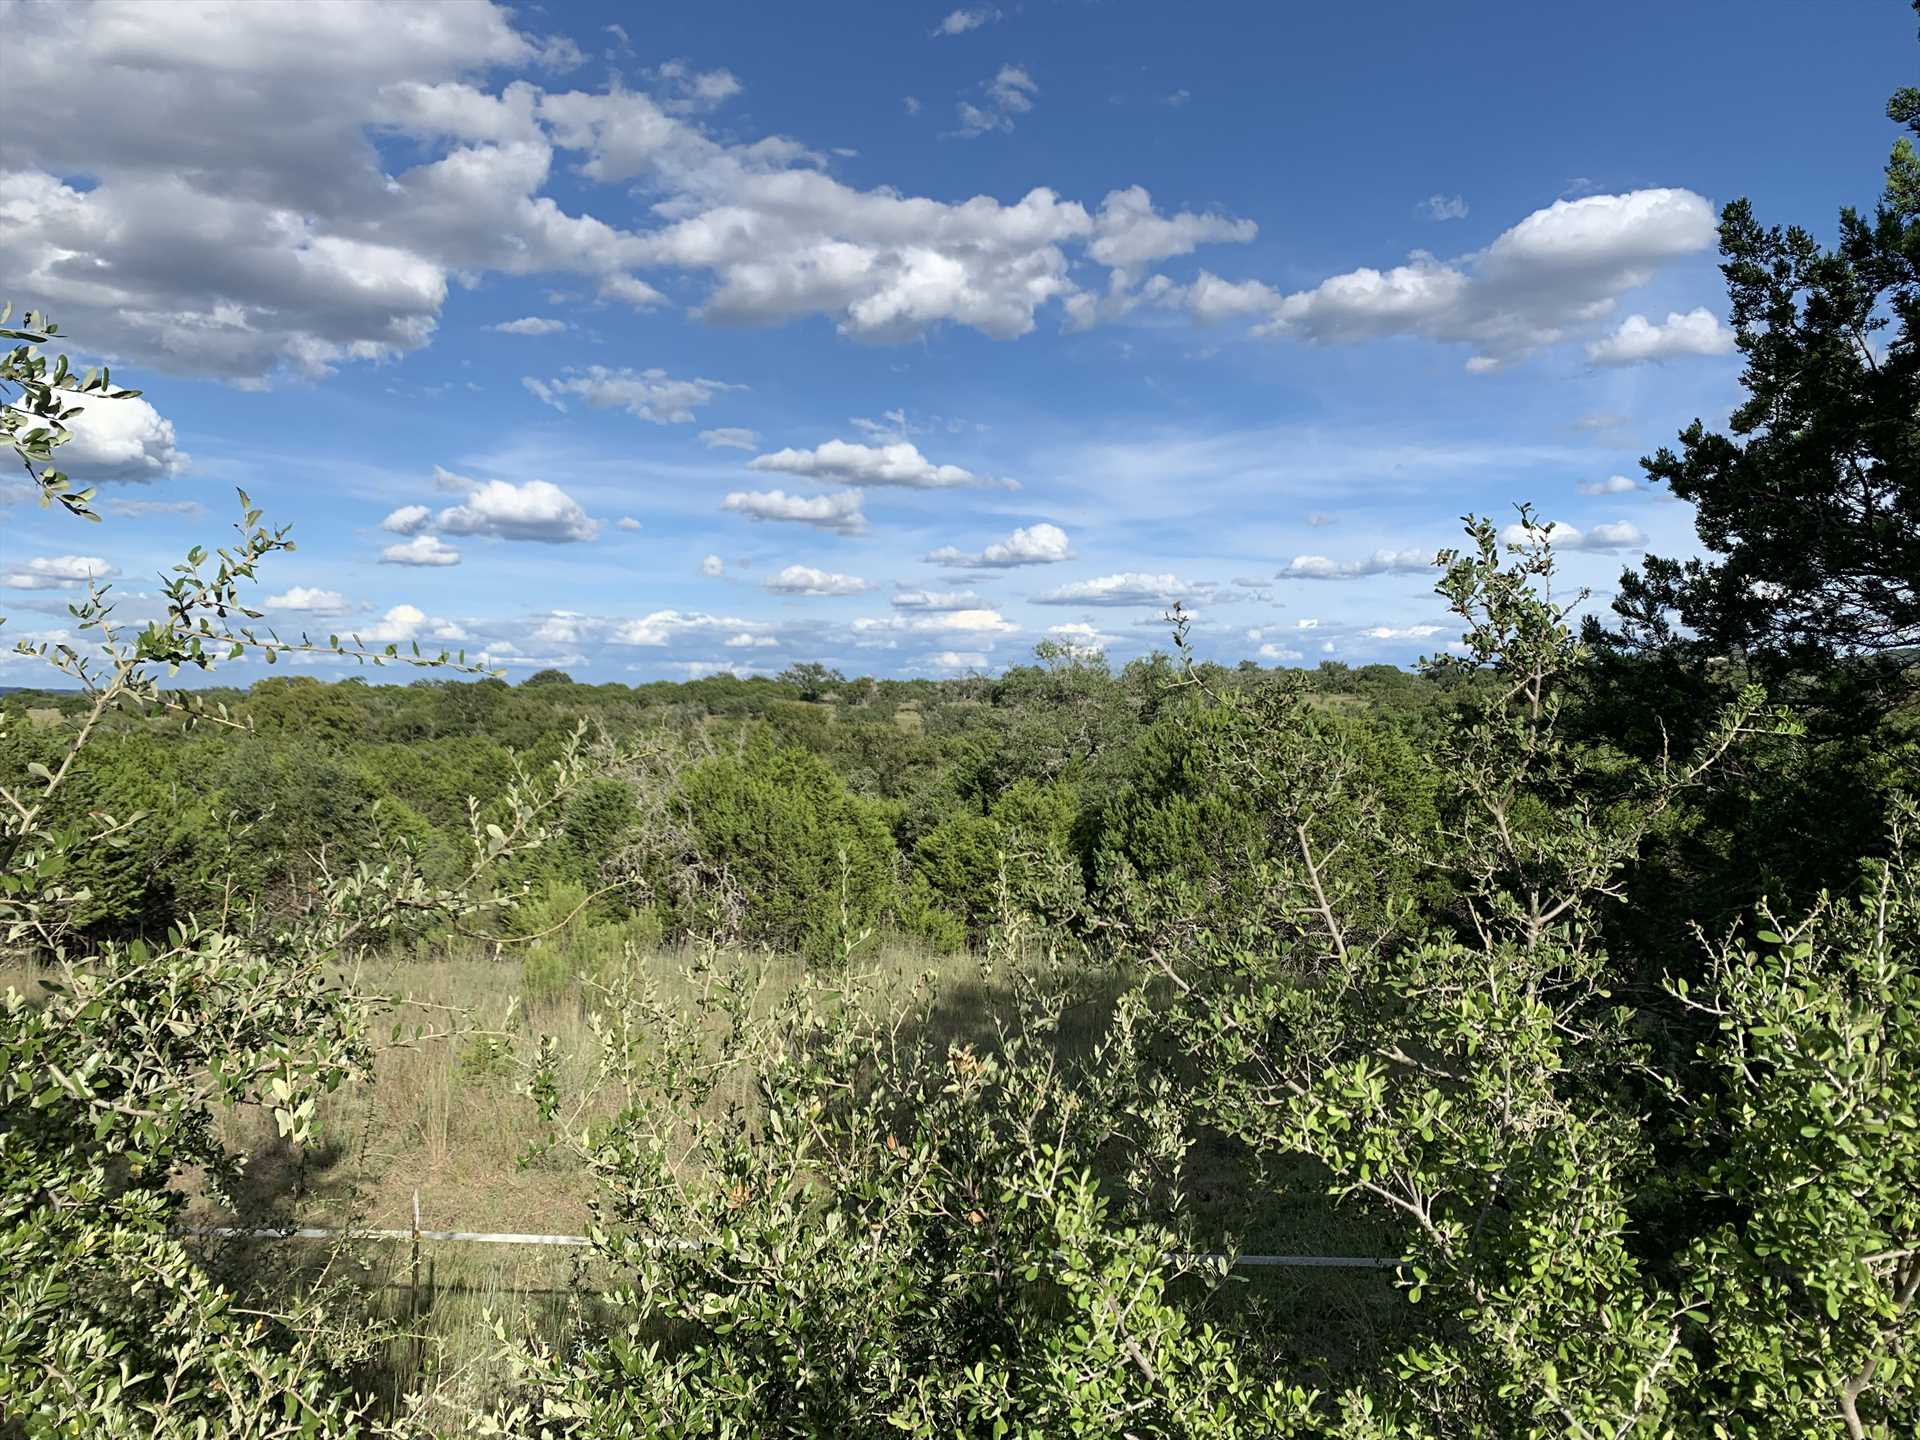                                                 This is your view from the deck! 30 acres of ranch to explore and enjoy, as well as those inspiring Hill Country vistas.